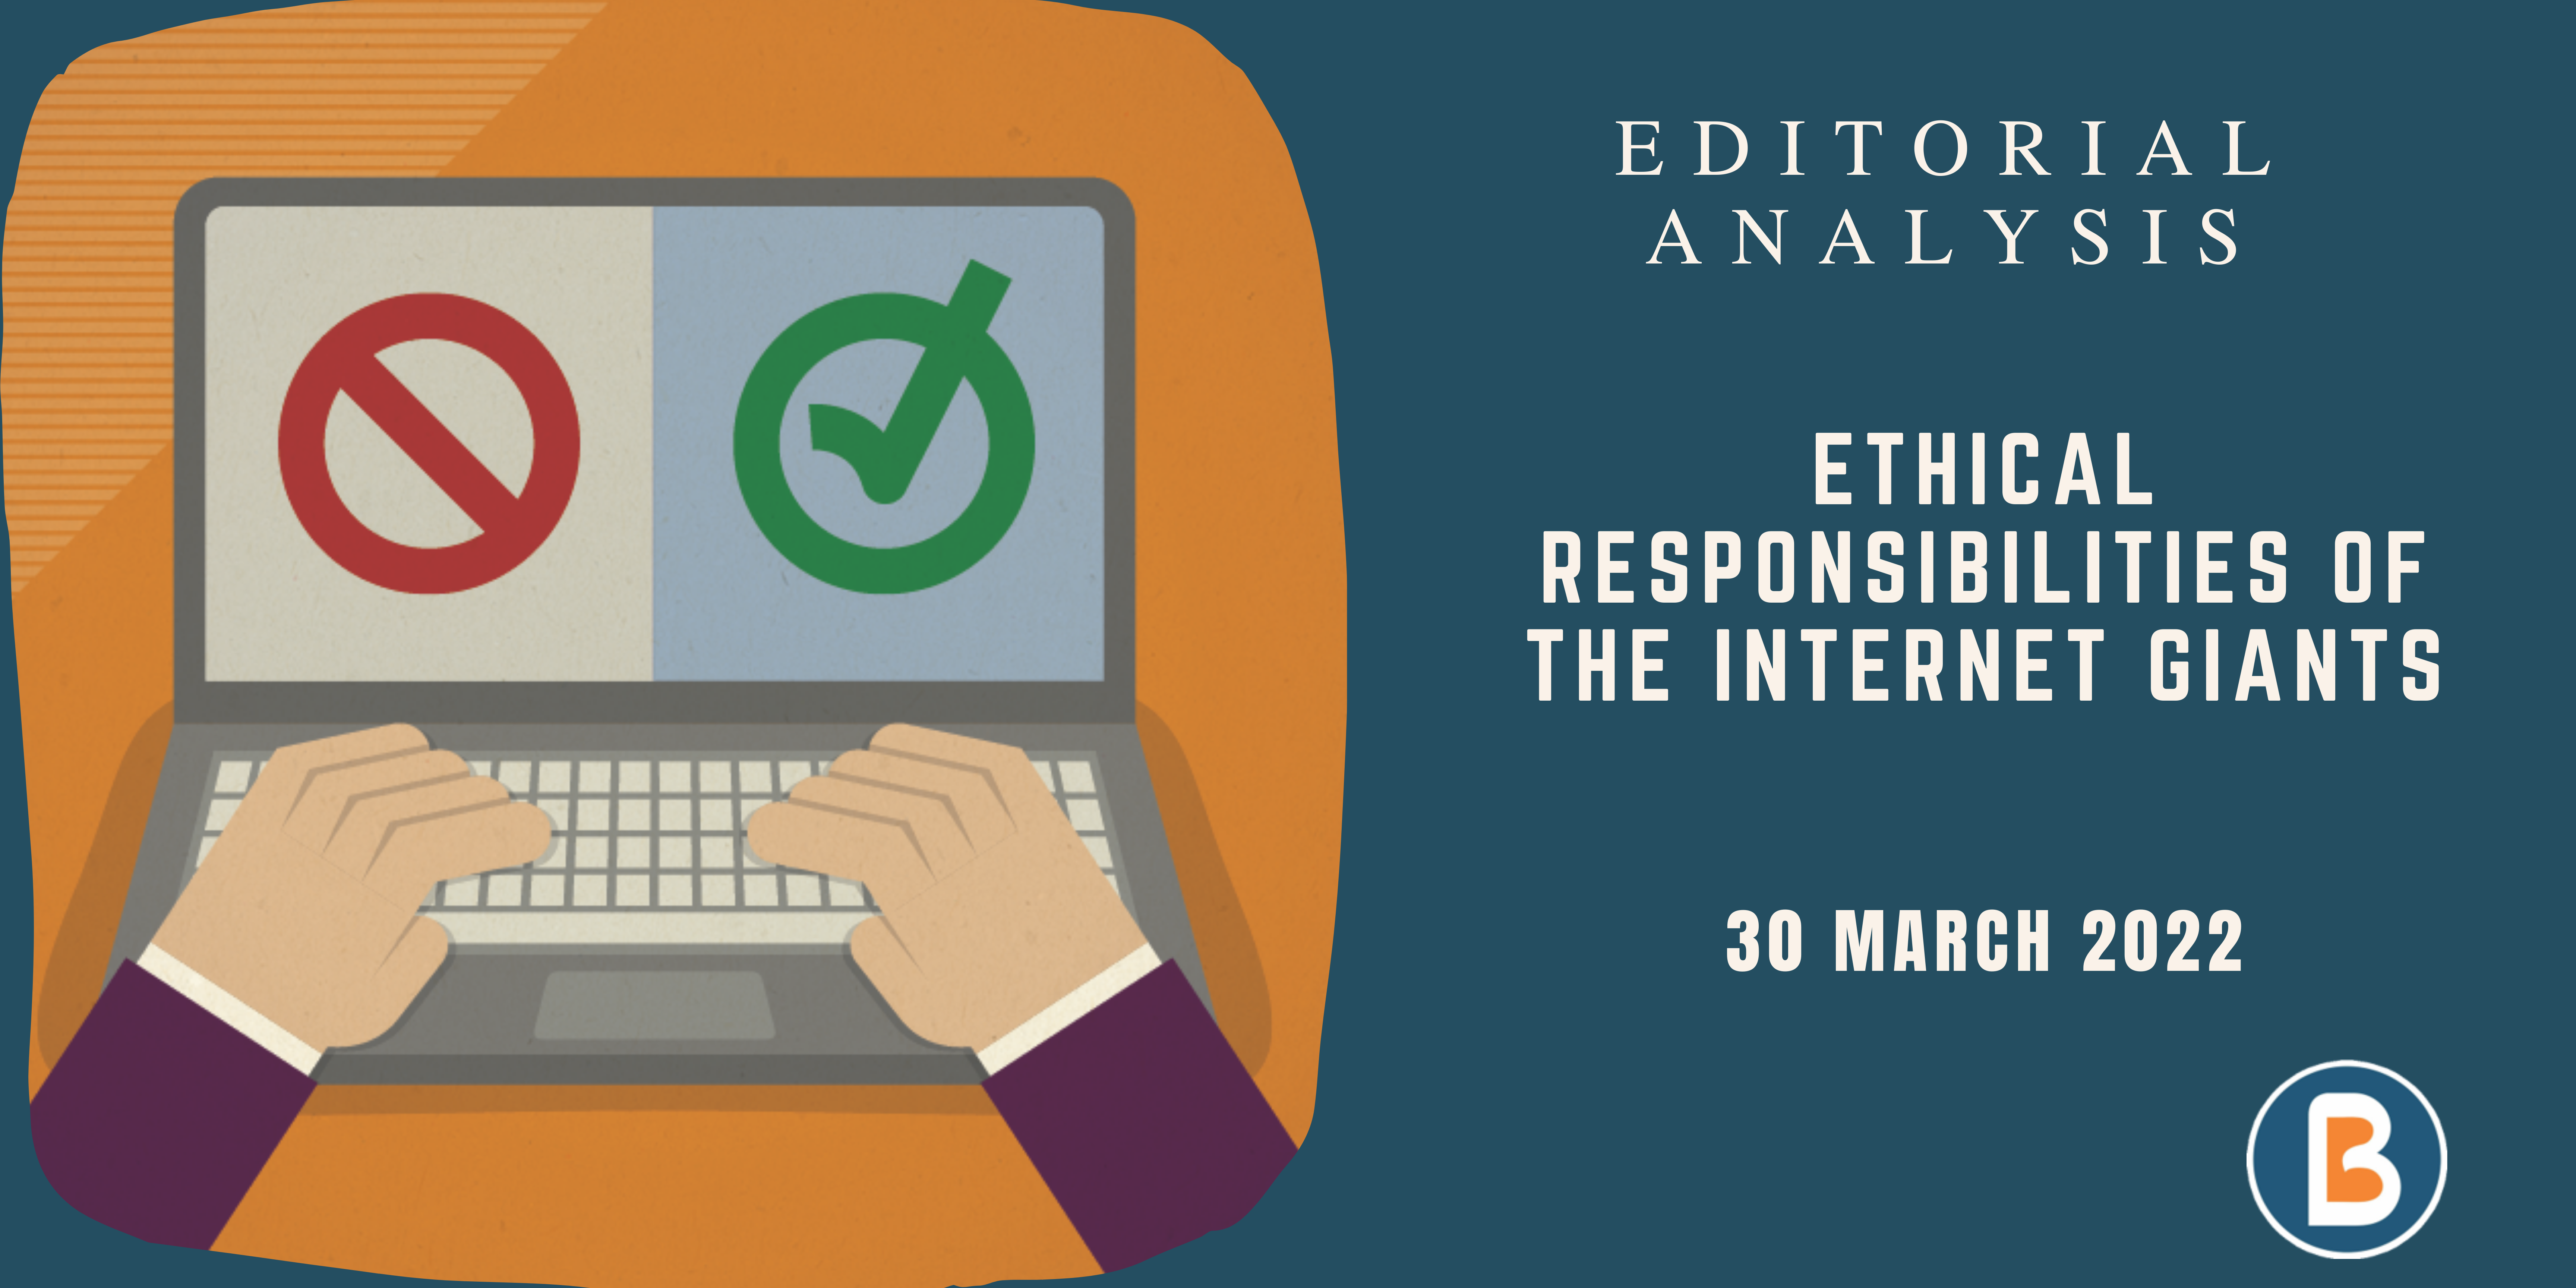 Editorial Analysis for IAS - Ethical Responsibilities of the Internet Giants